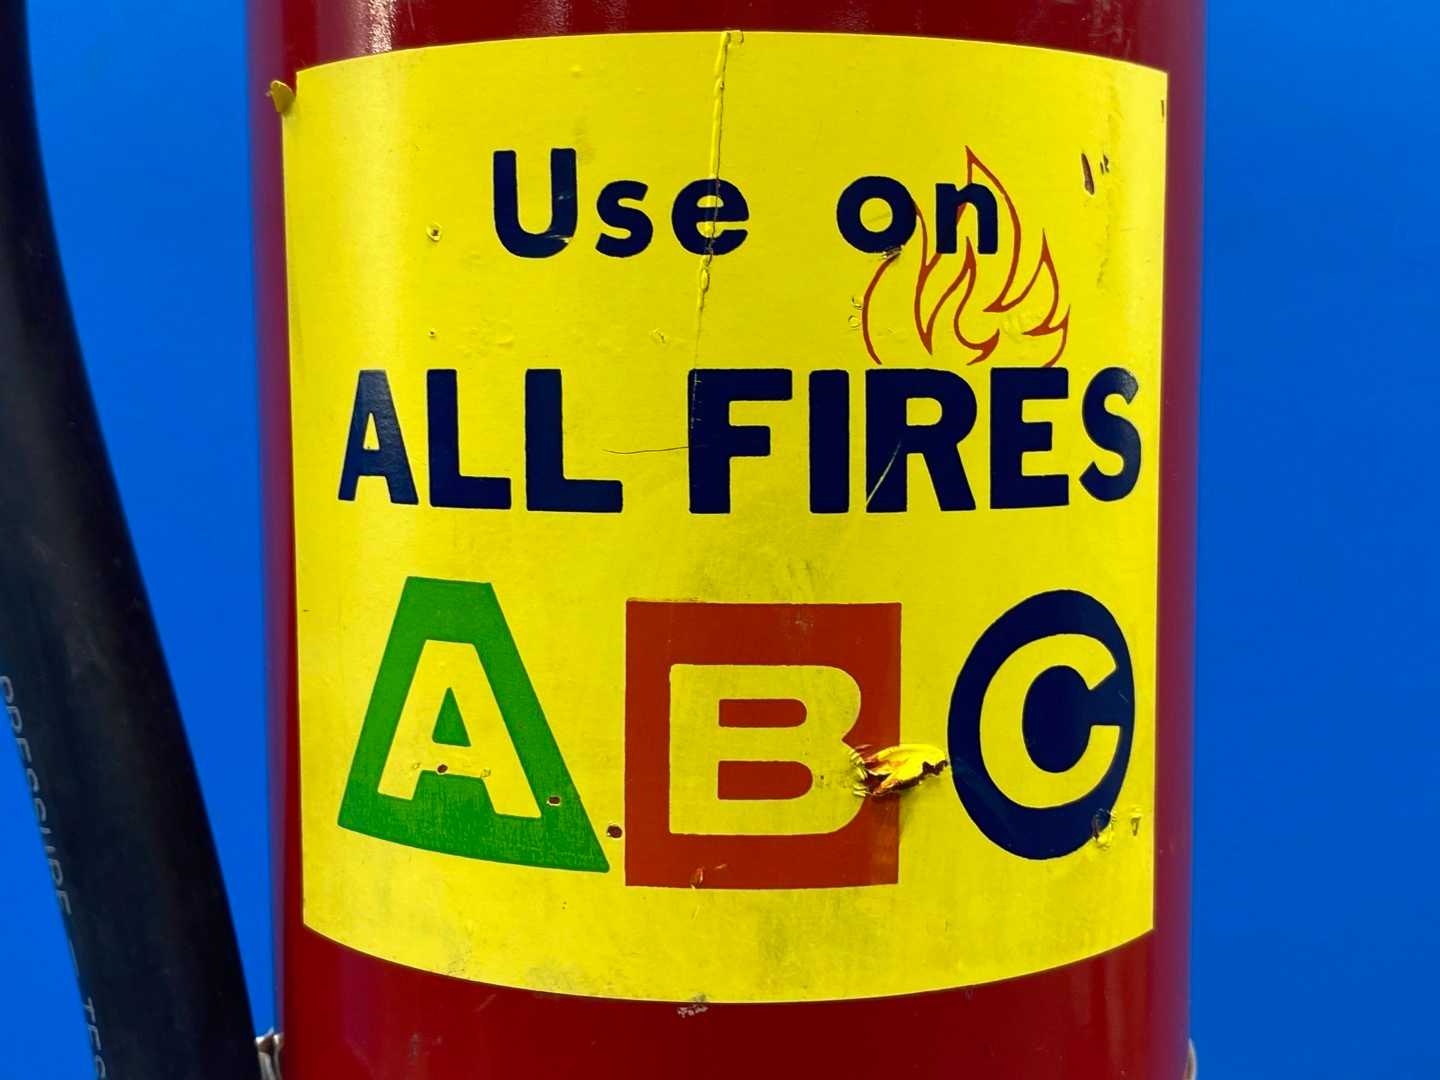 General TGP-10G ABC Fire Extinguisher